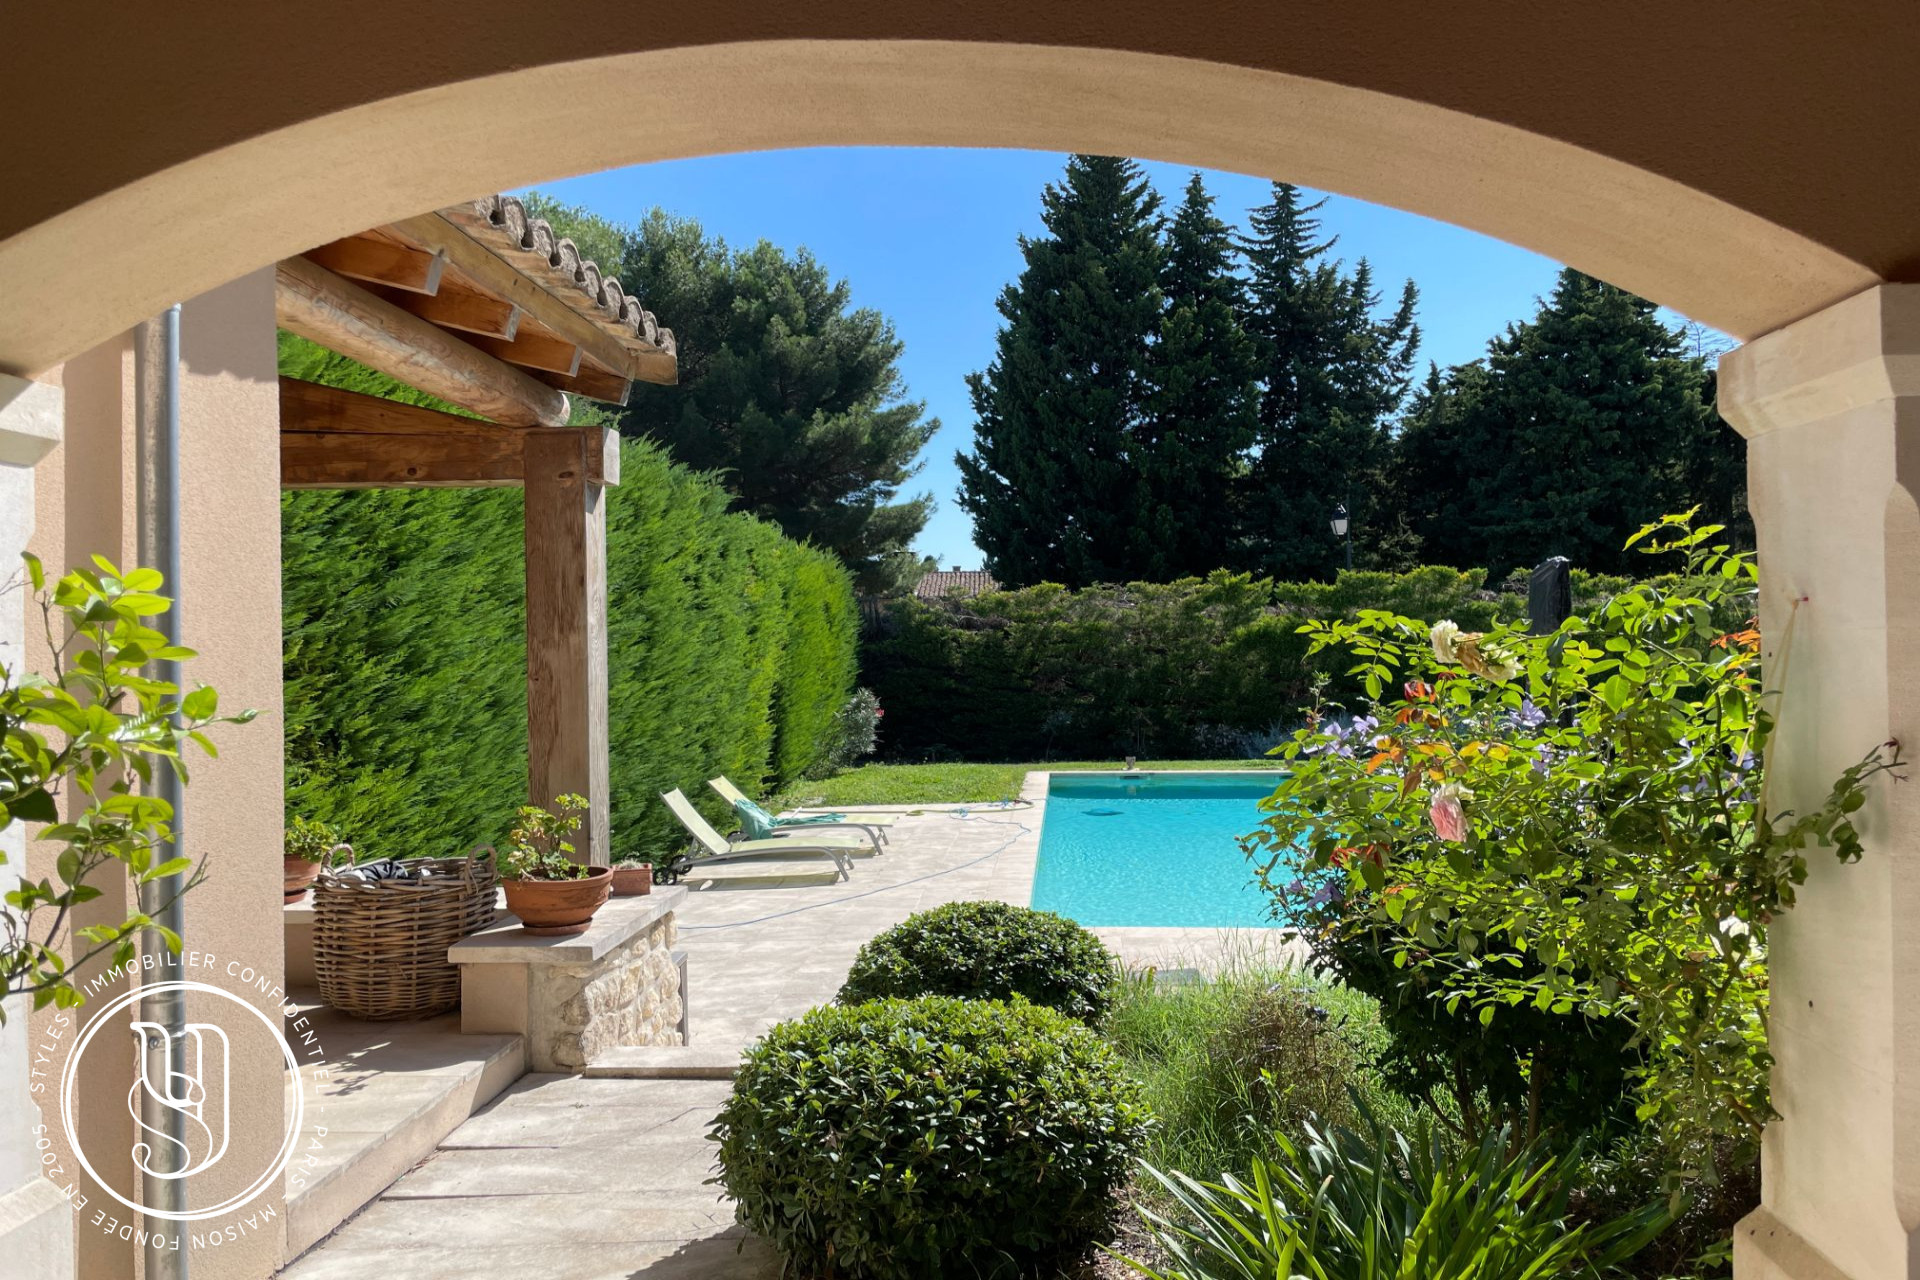 Maussane-les-Alpilles - A haven of peace in the heart of the city - image 15